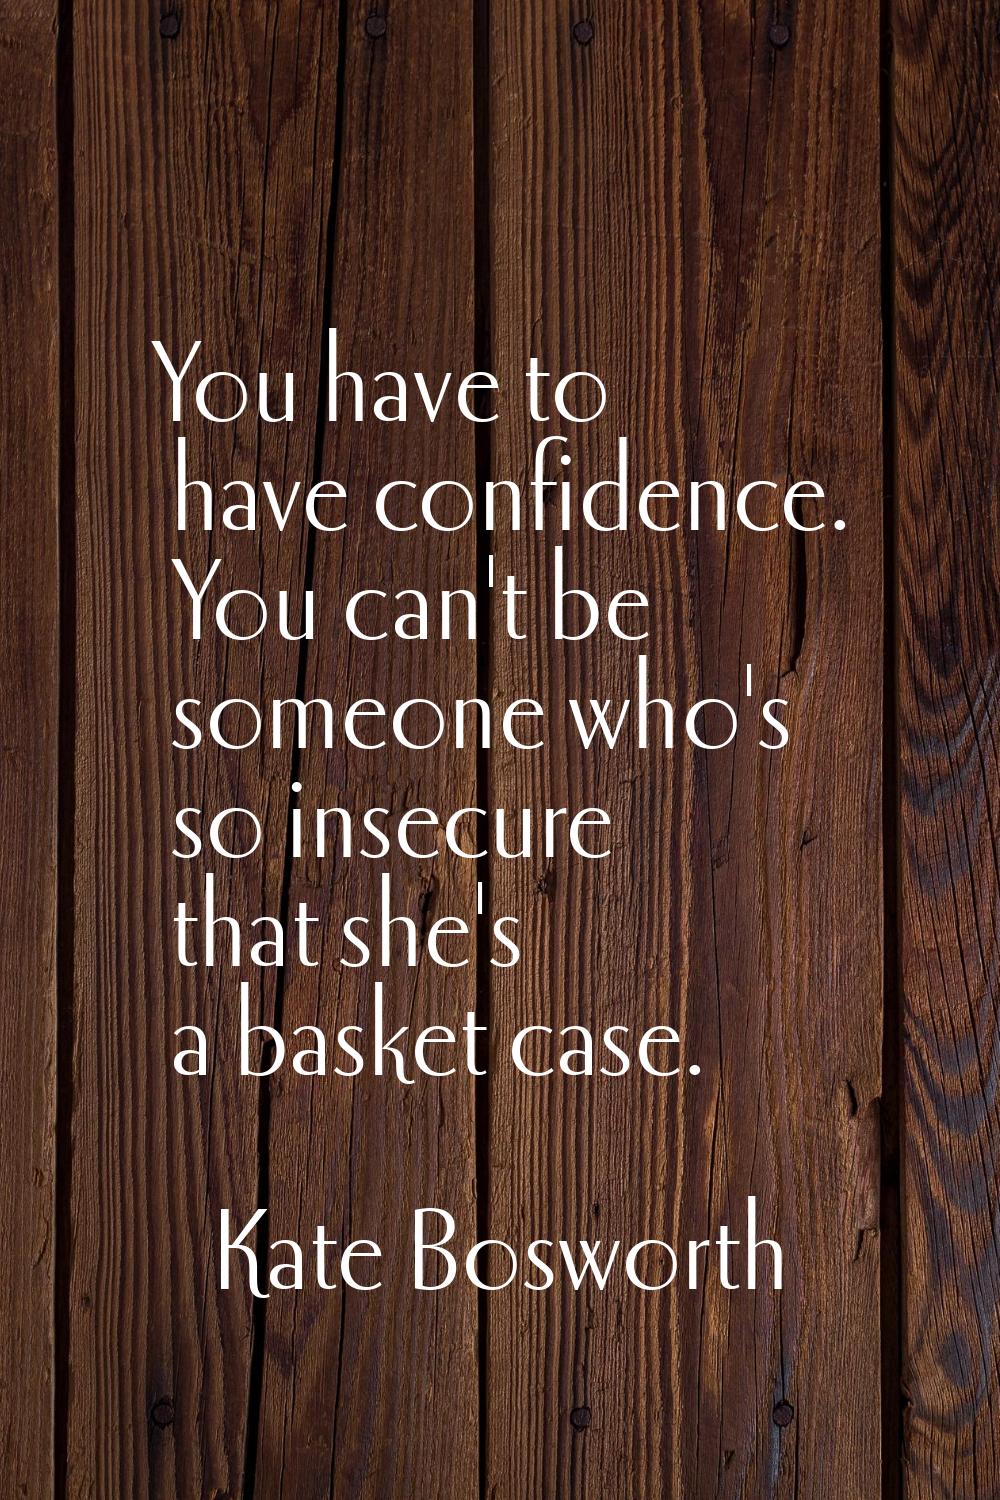 You have to have confidence. You can't be someone who's so insecure that she's a basket case.